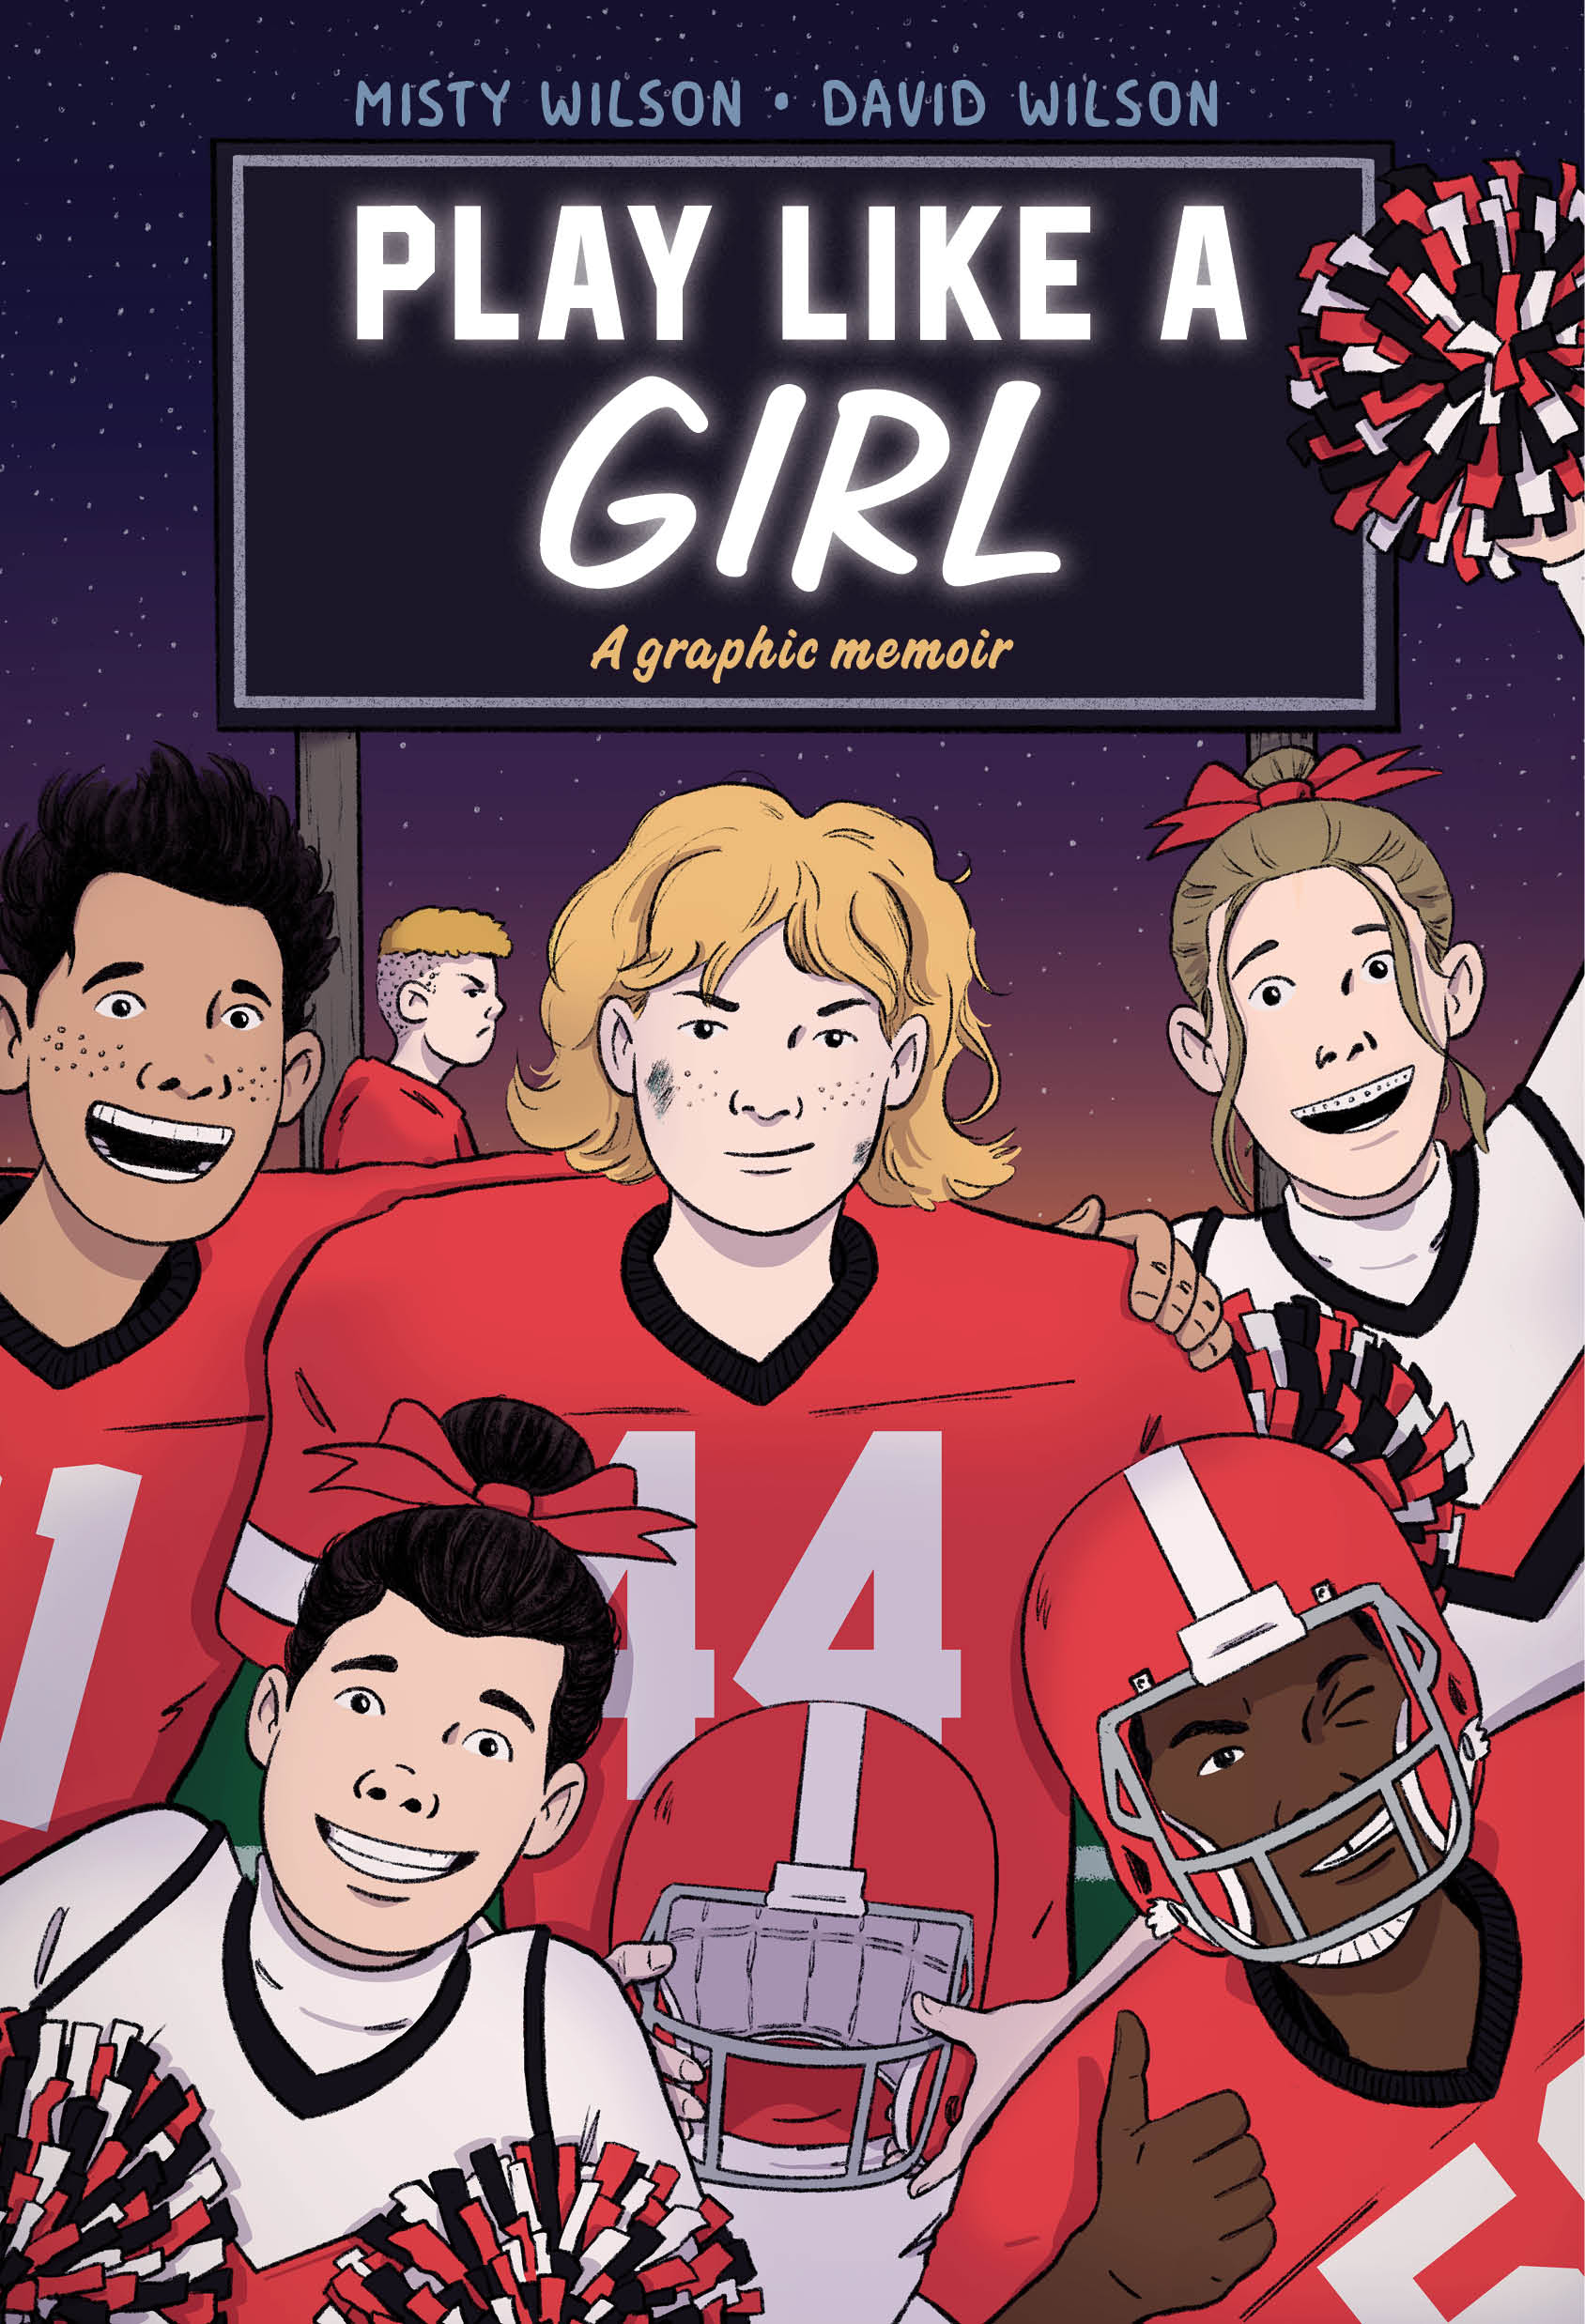 Book Review: Play Like a Girl by Misty Wilson with illustrations by David Wilson